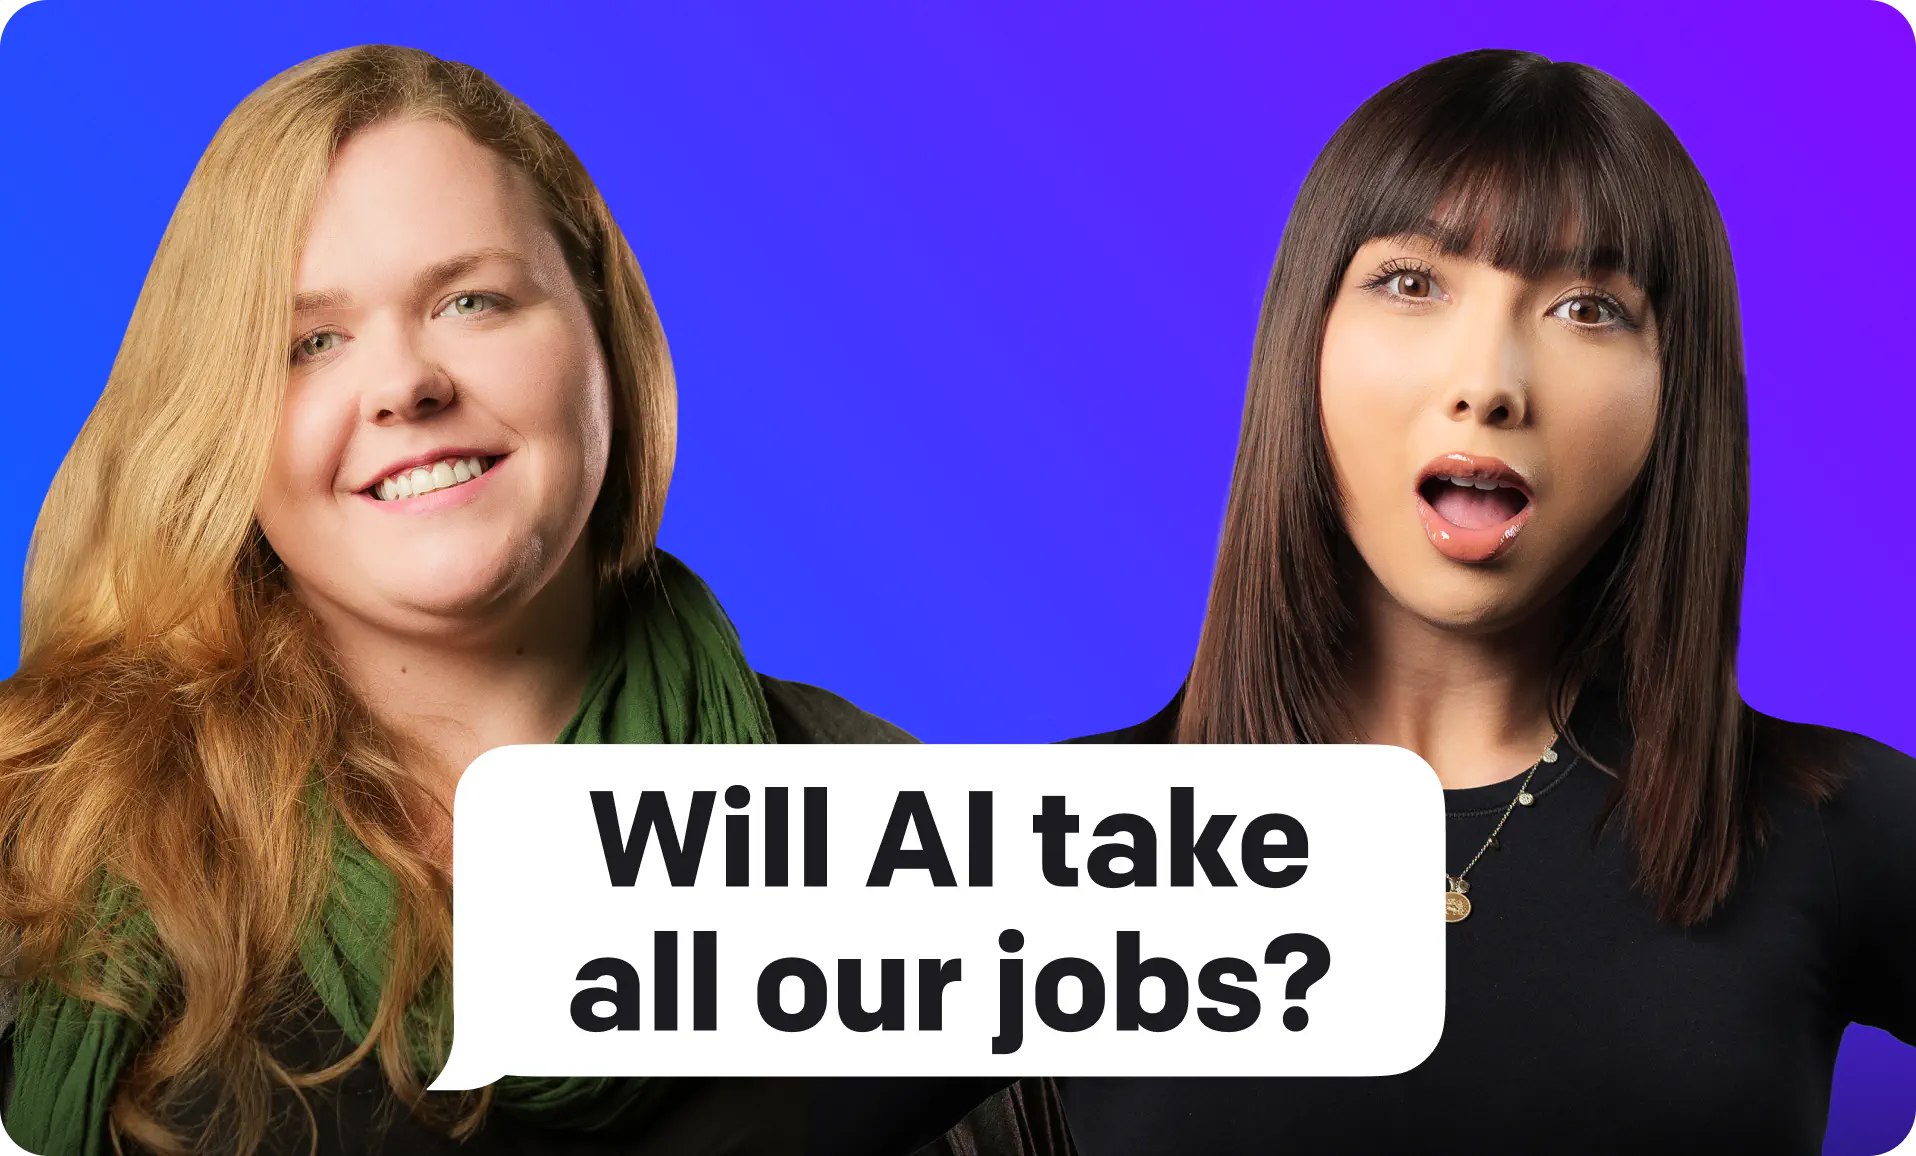 Two people in a conversation about AI taking jobs